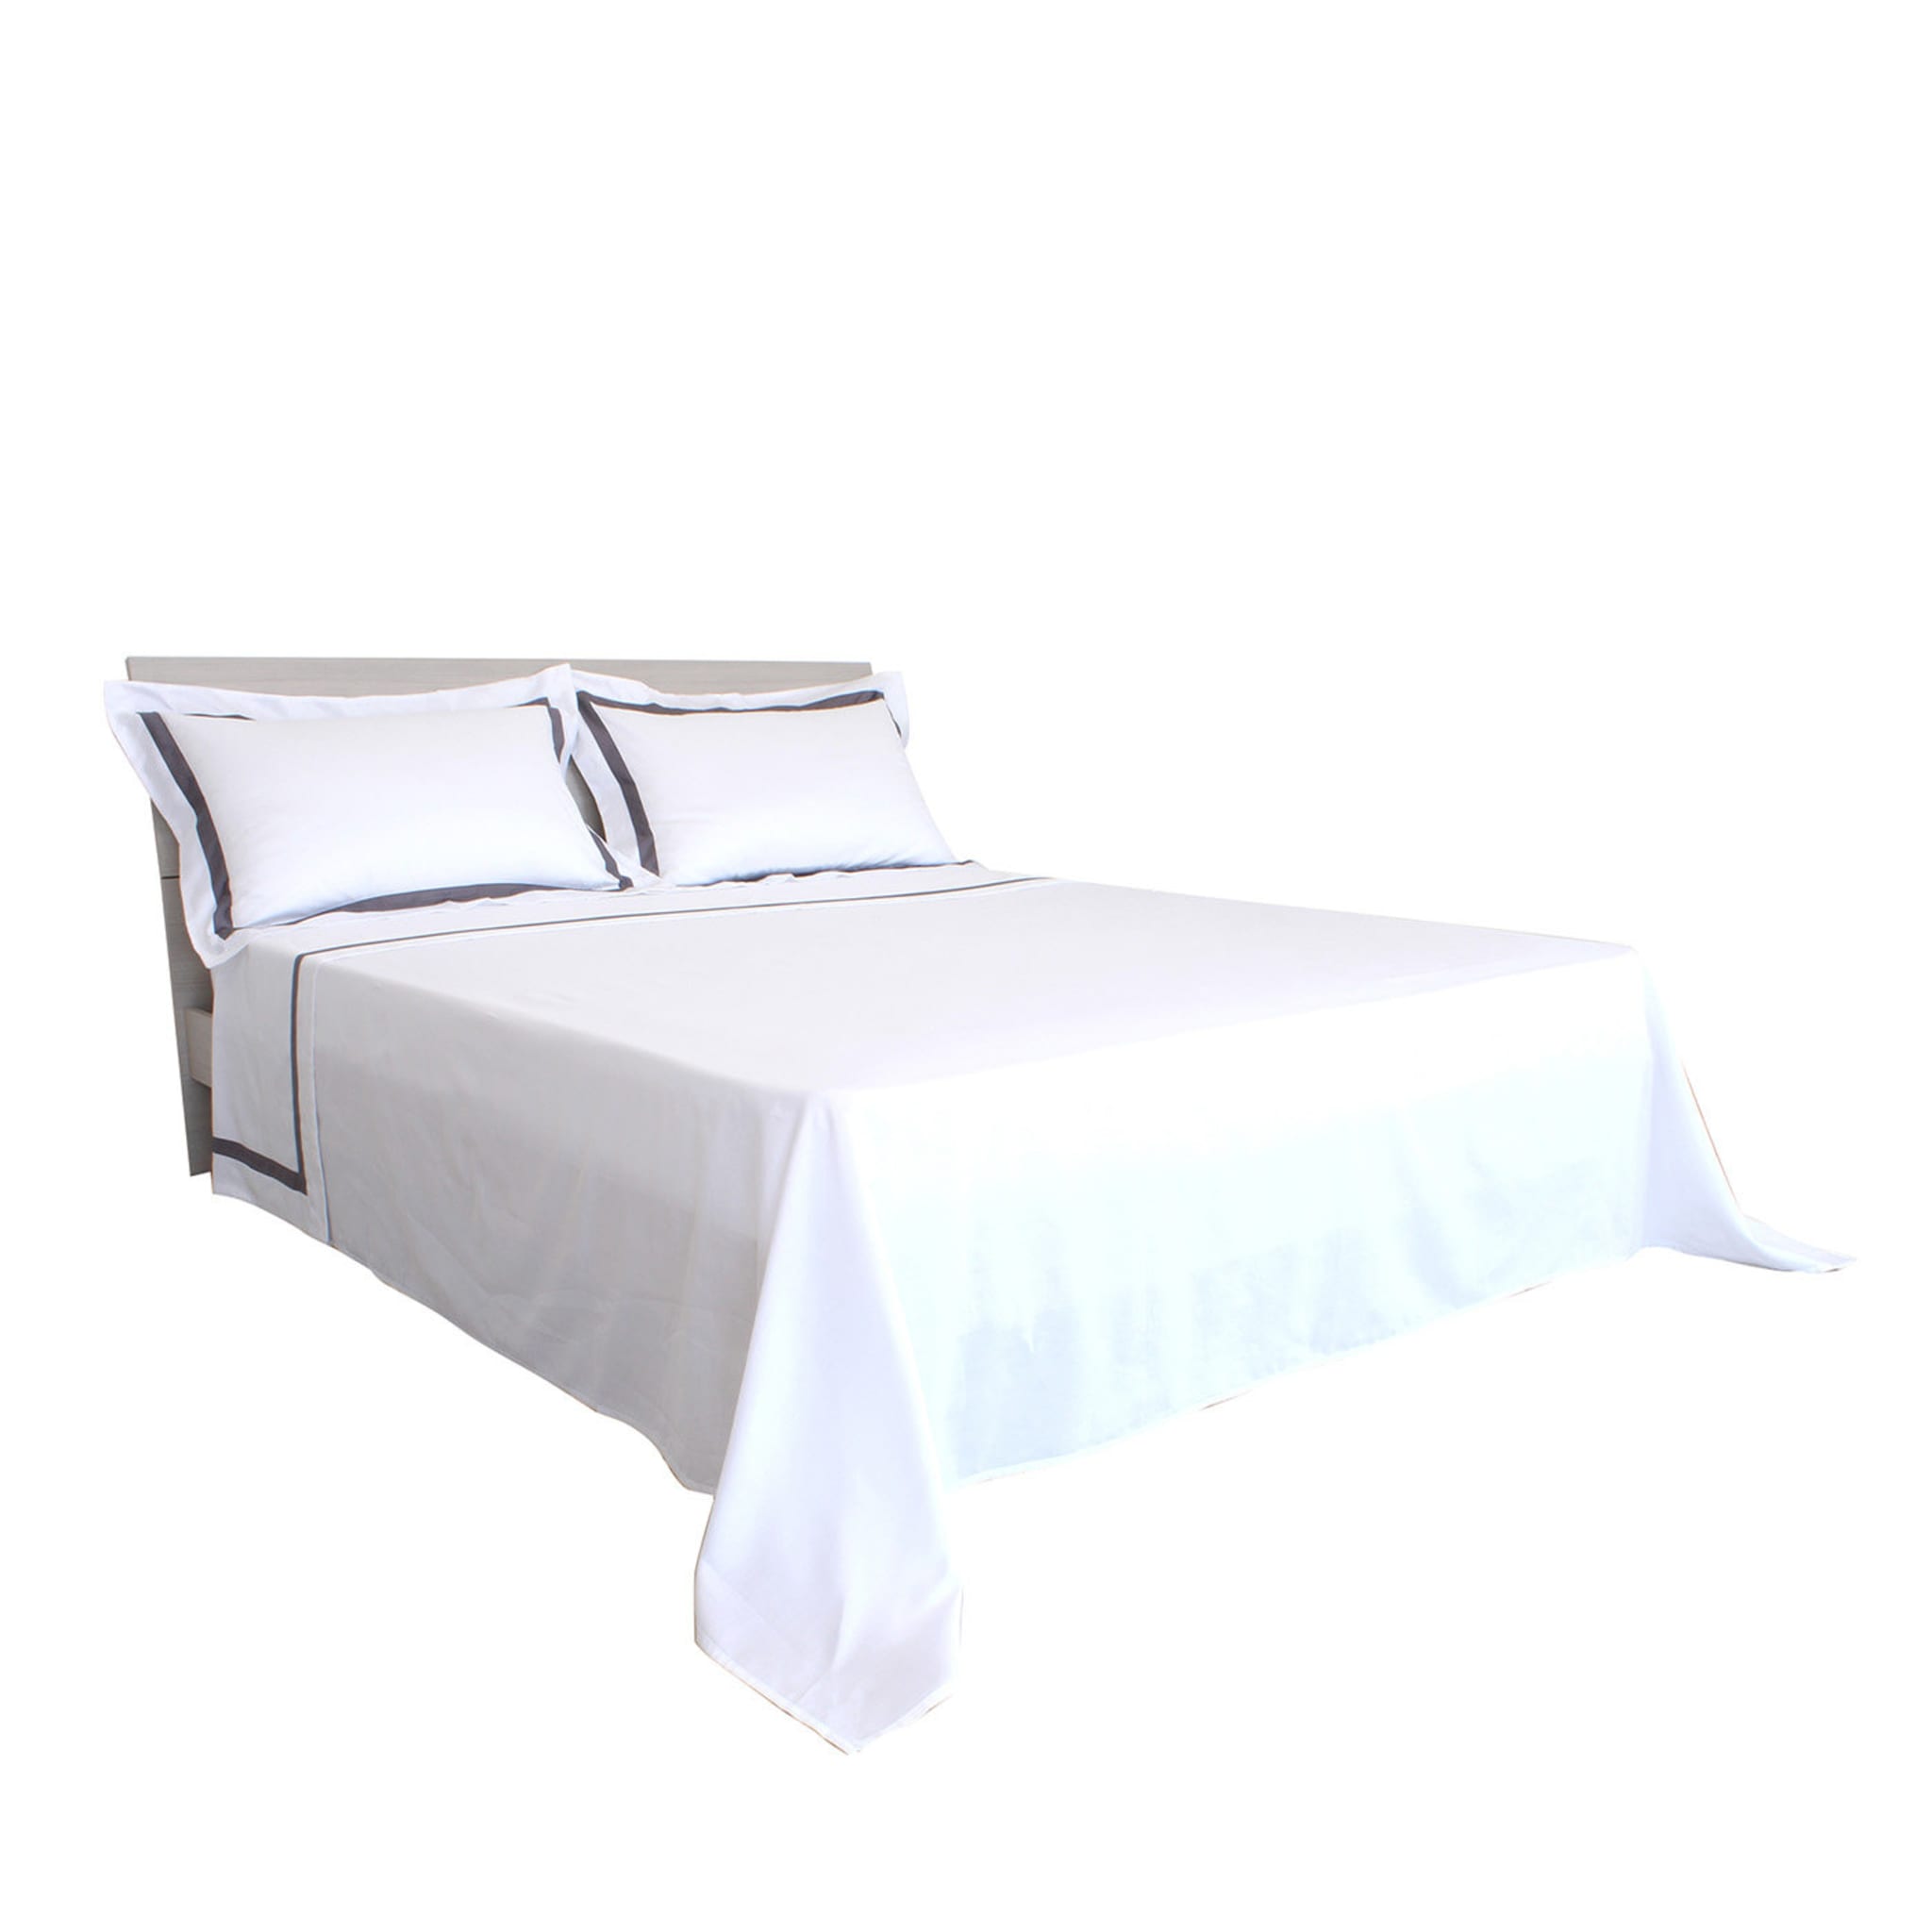 Purity King Size Sheet Set with Pillowcases - Main view